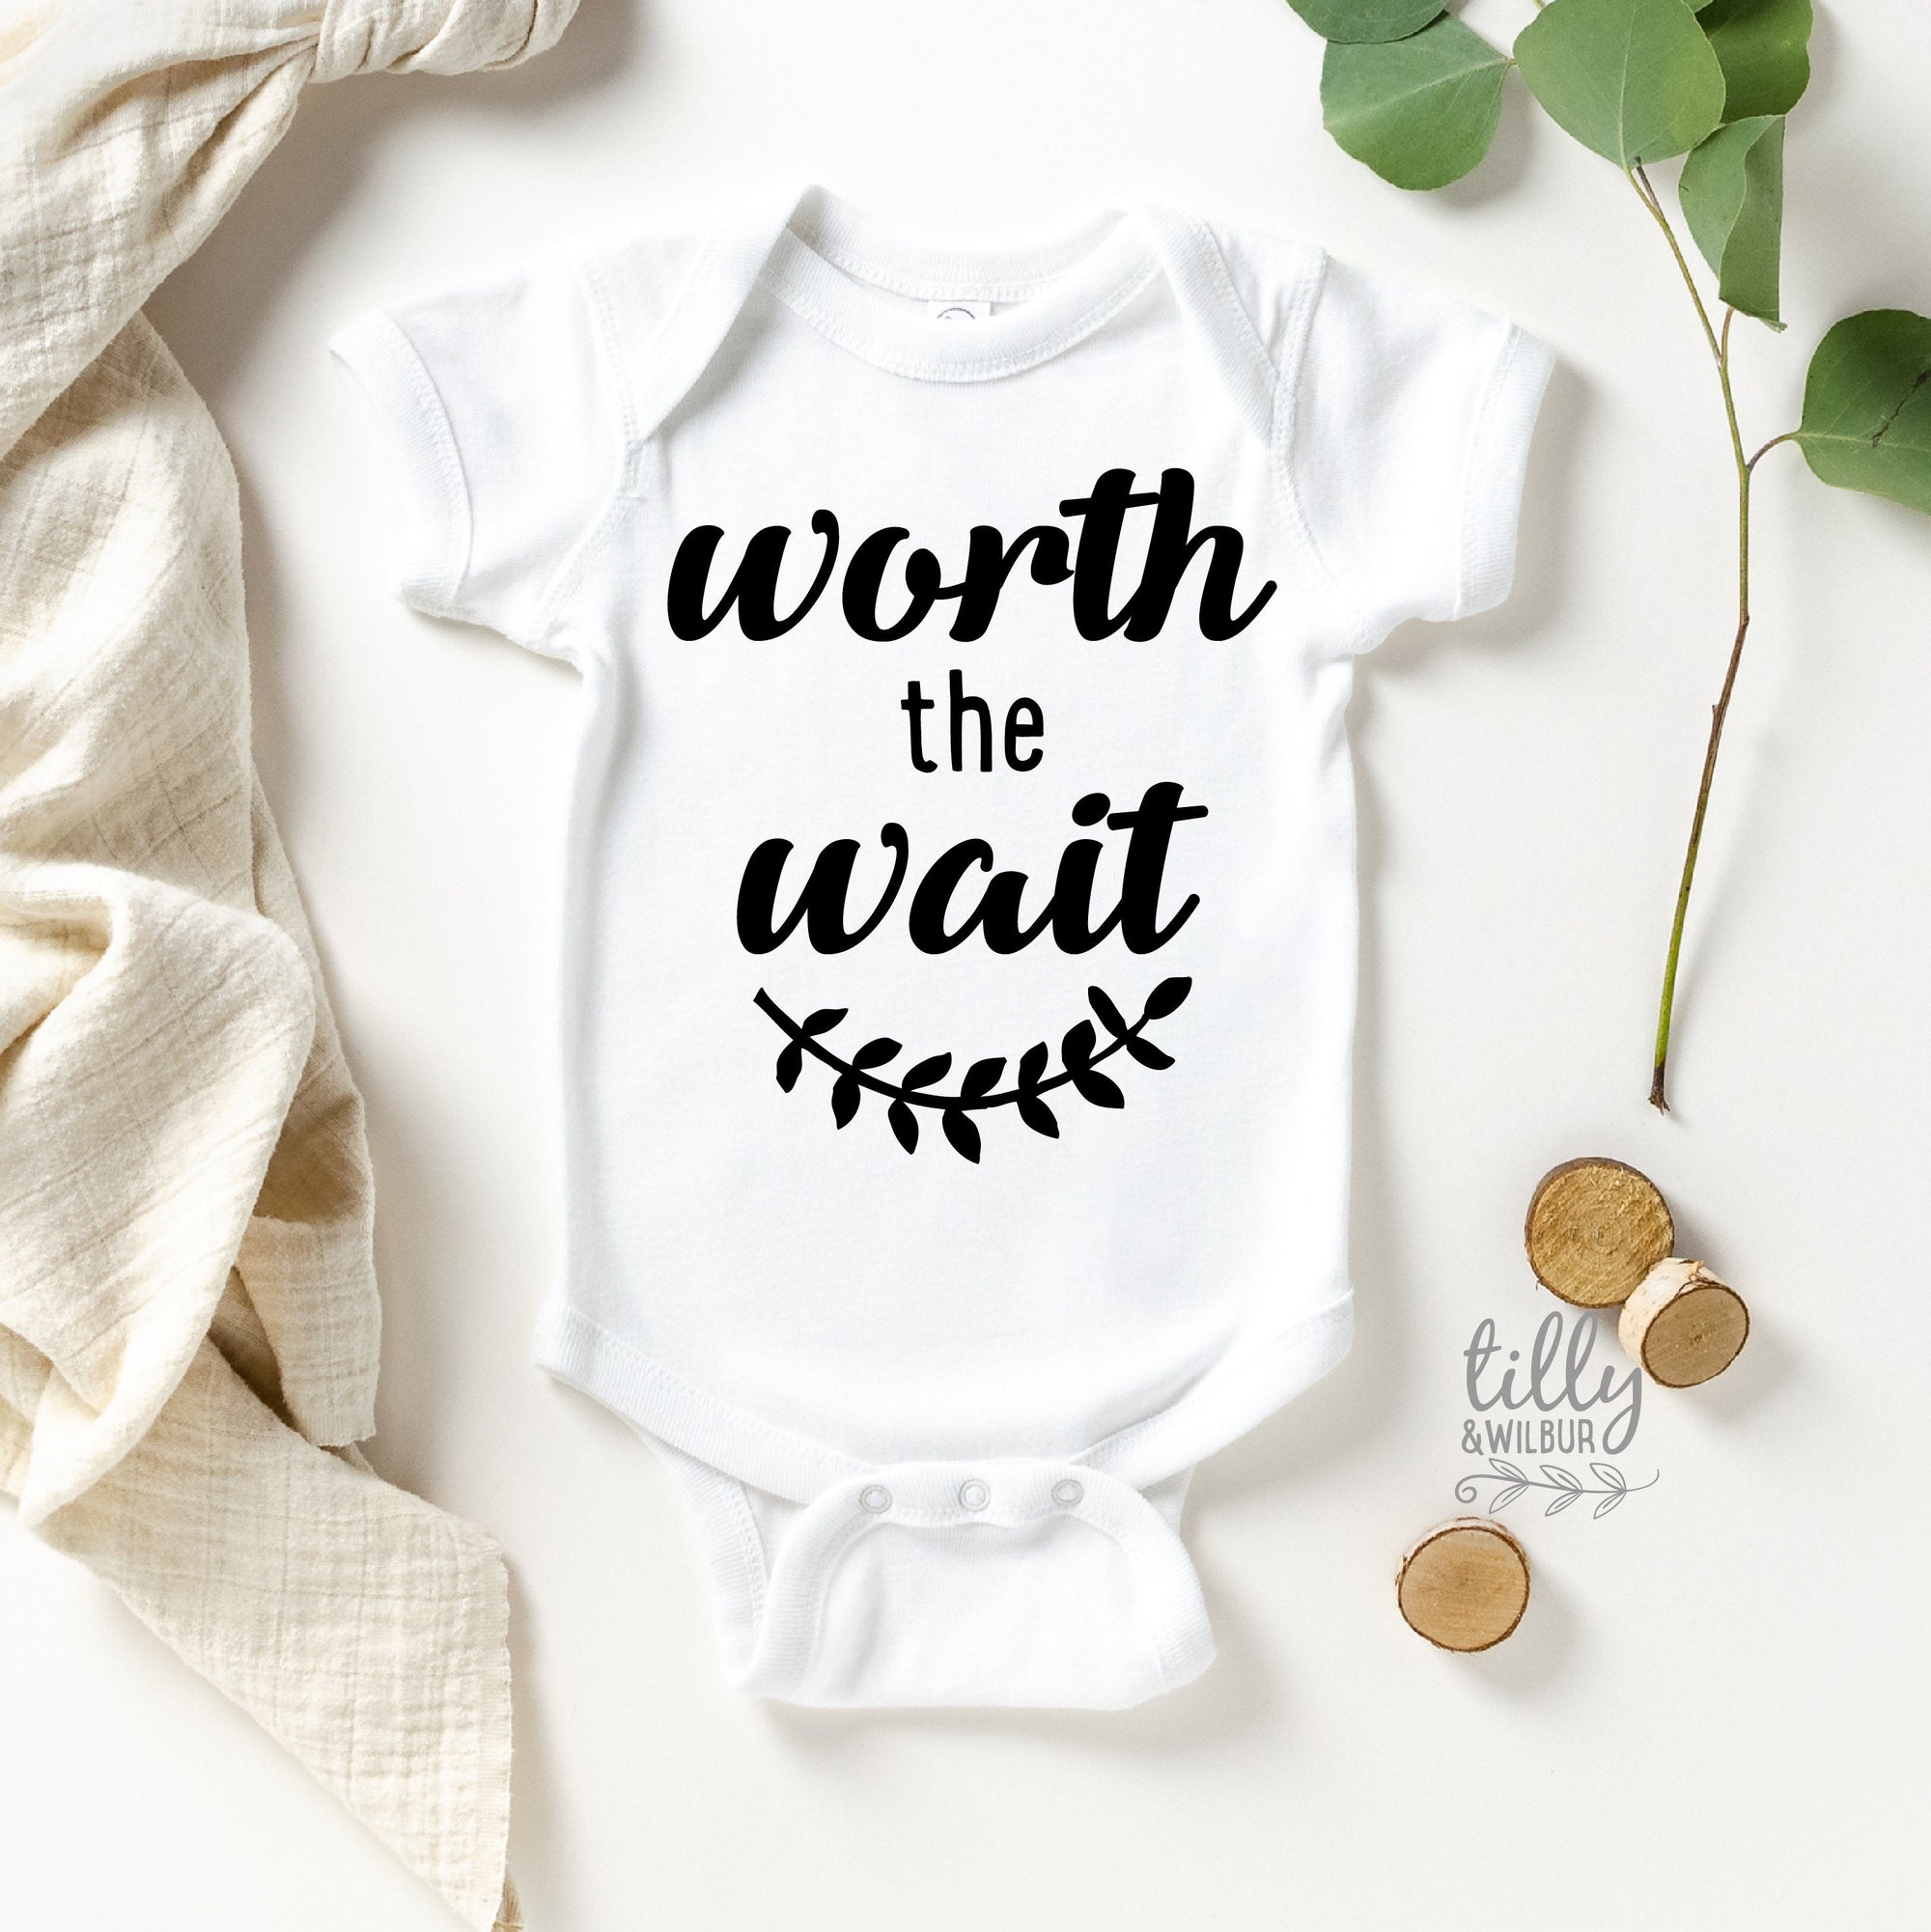 Worth The Wait Baby Bodysuit, Pregnancy Announcement, Maternity Photo Prop, Reveal, Worth The Long Wait, Some Things Are Worth The Wait